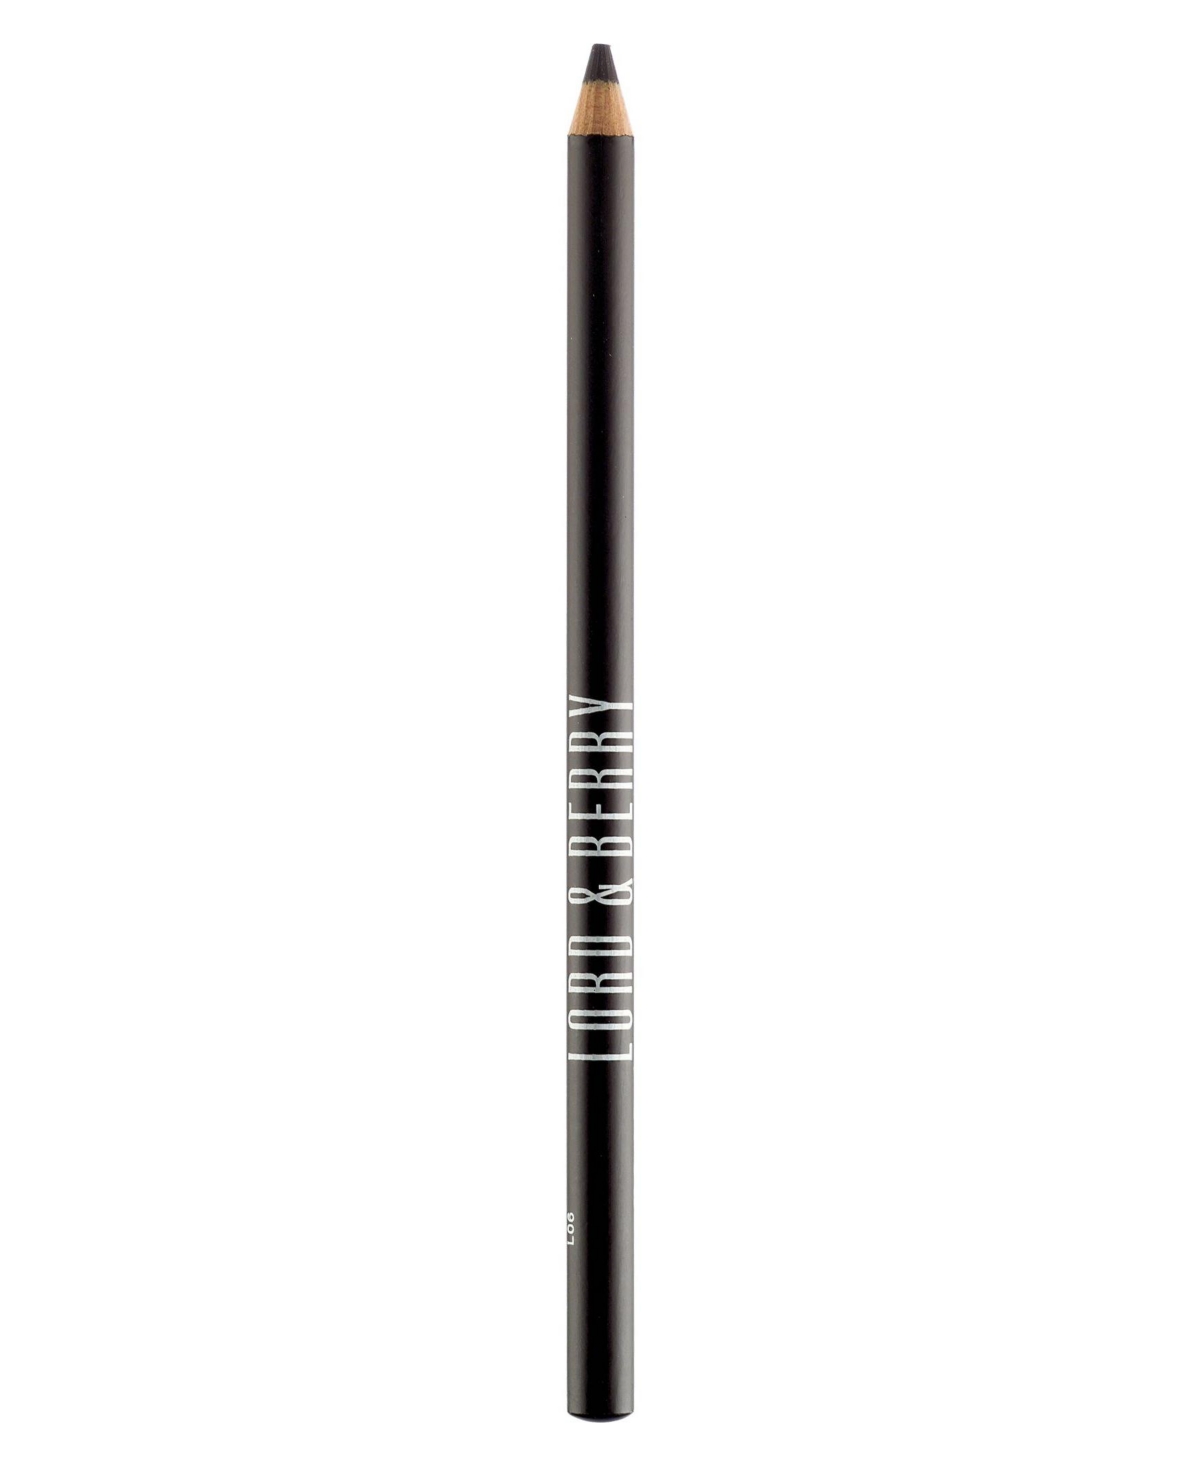 UPC 050425002196 product image for Lord & Berry Line Shade Eye Pencil, 0.07 oz | upcitemdb.com